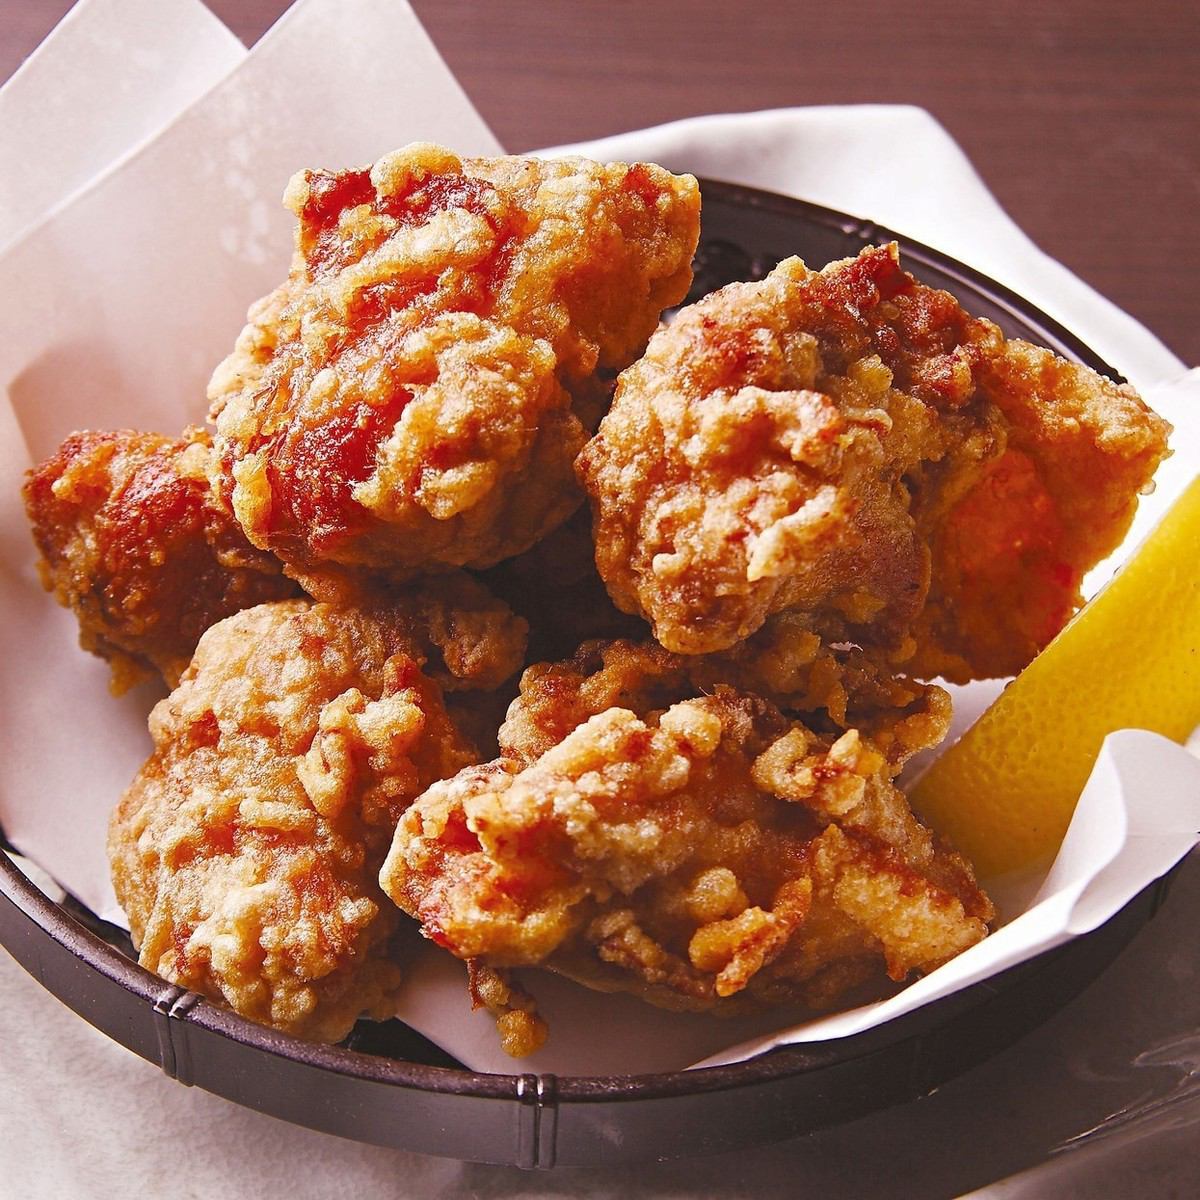 Our proudly freshly fried chicken♪ Enjoy it piping hot!